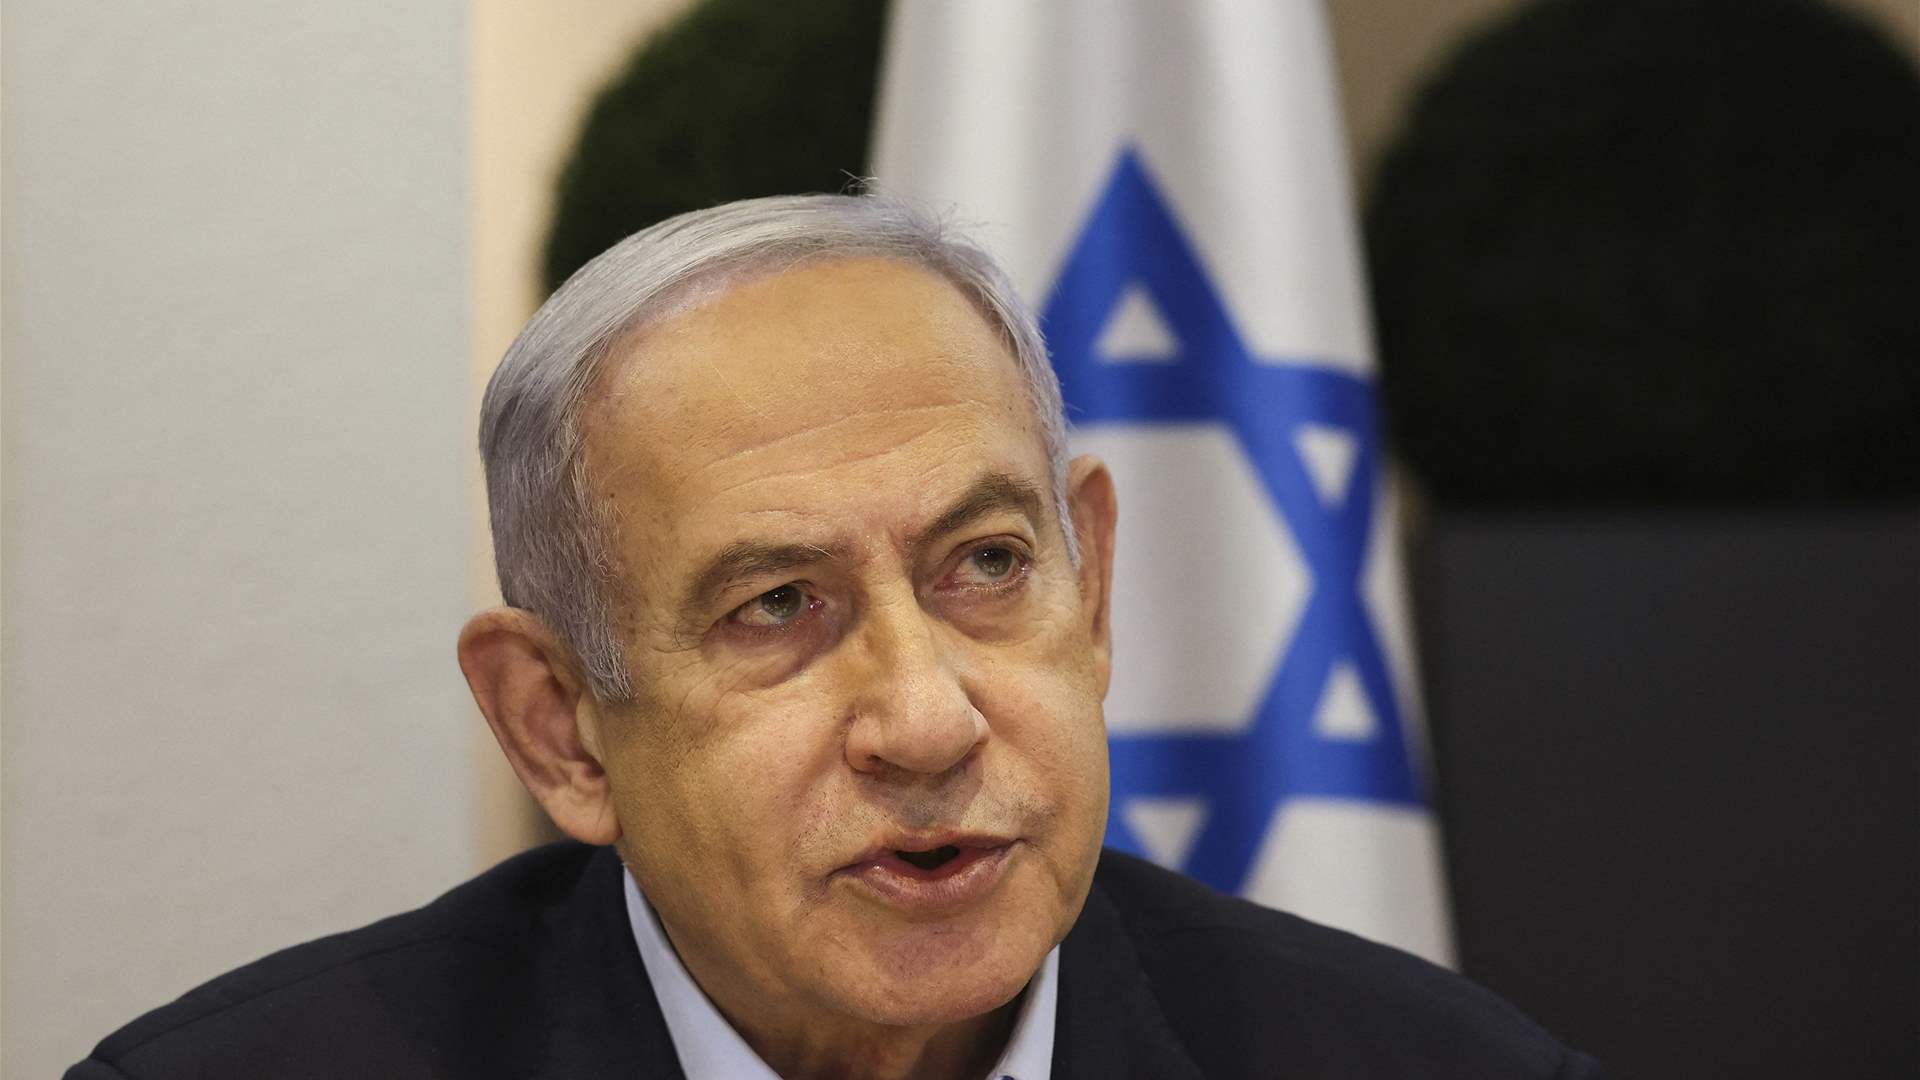 Israel PM to deliver televised statement Wednesday evening